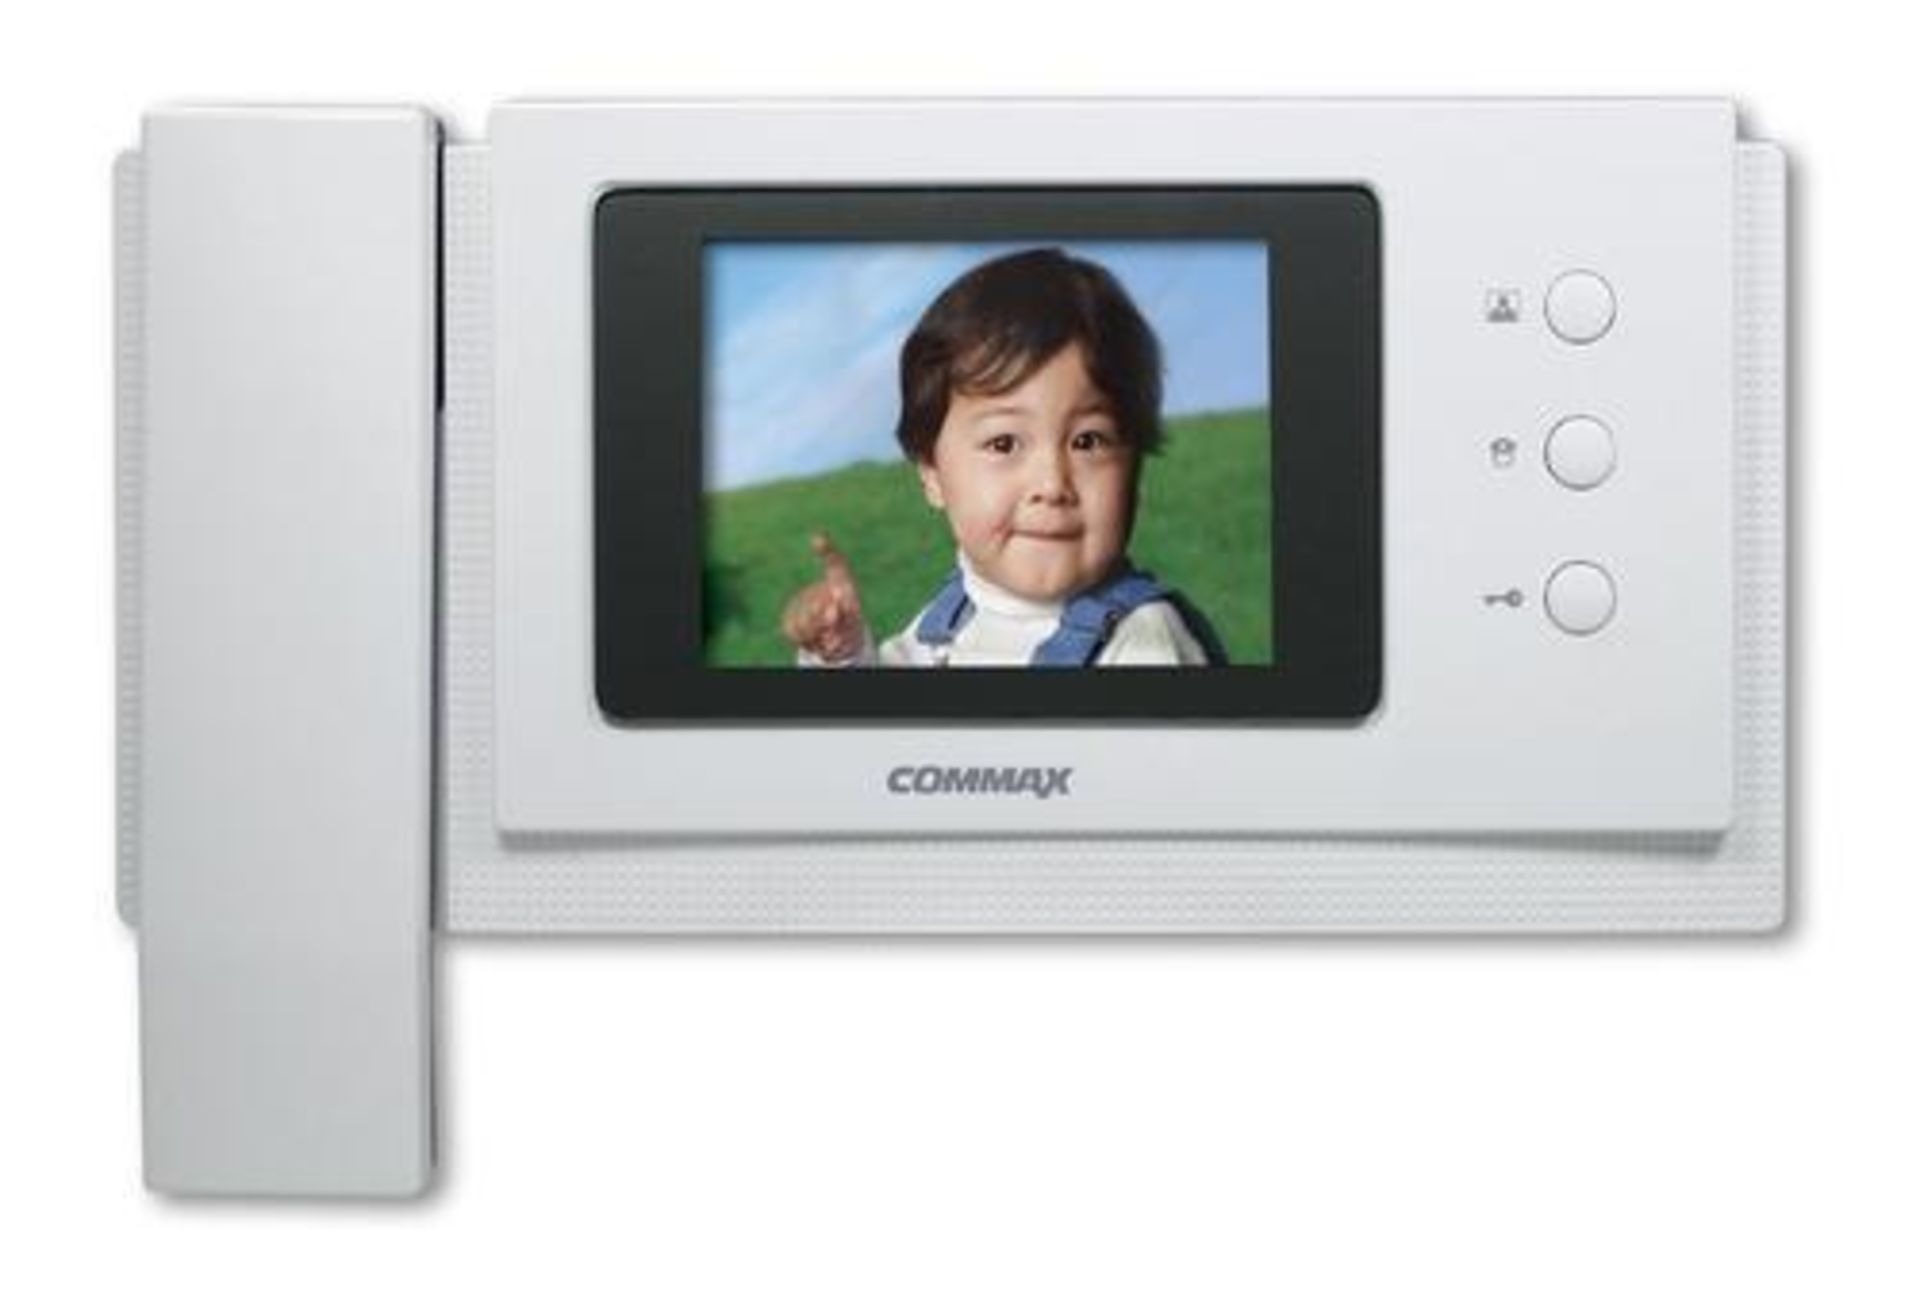 V Brand New Commax SmartHome & Security Video Doorphone With 4.3 inch TFT LED Screen With Talk &